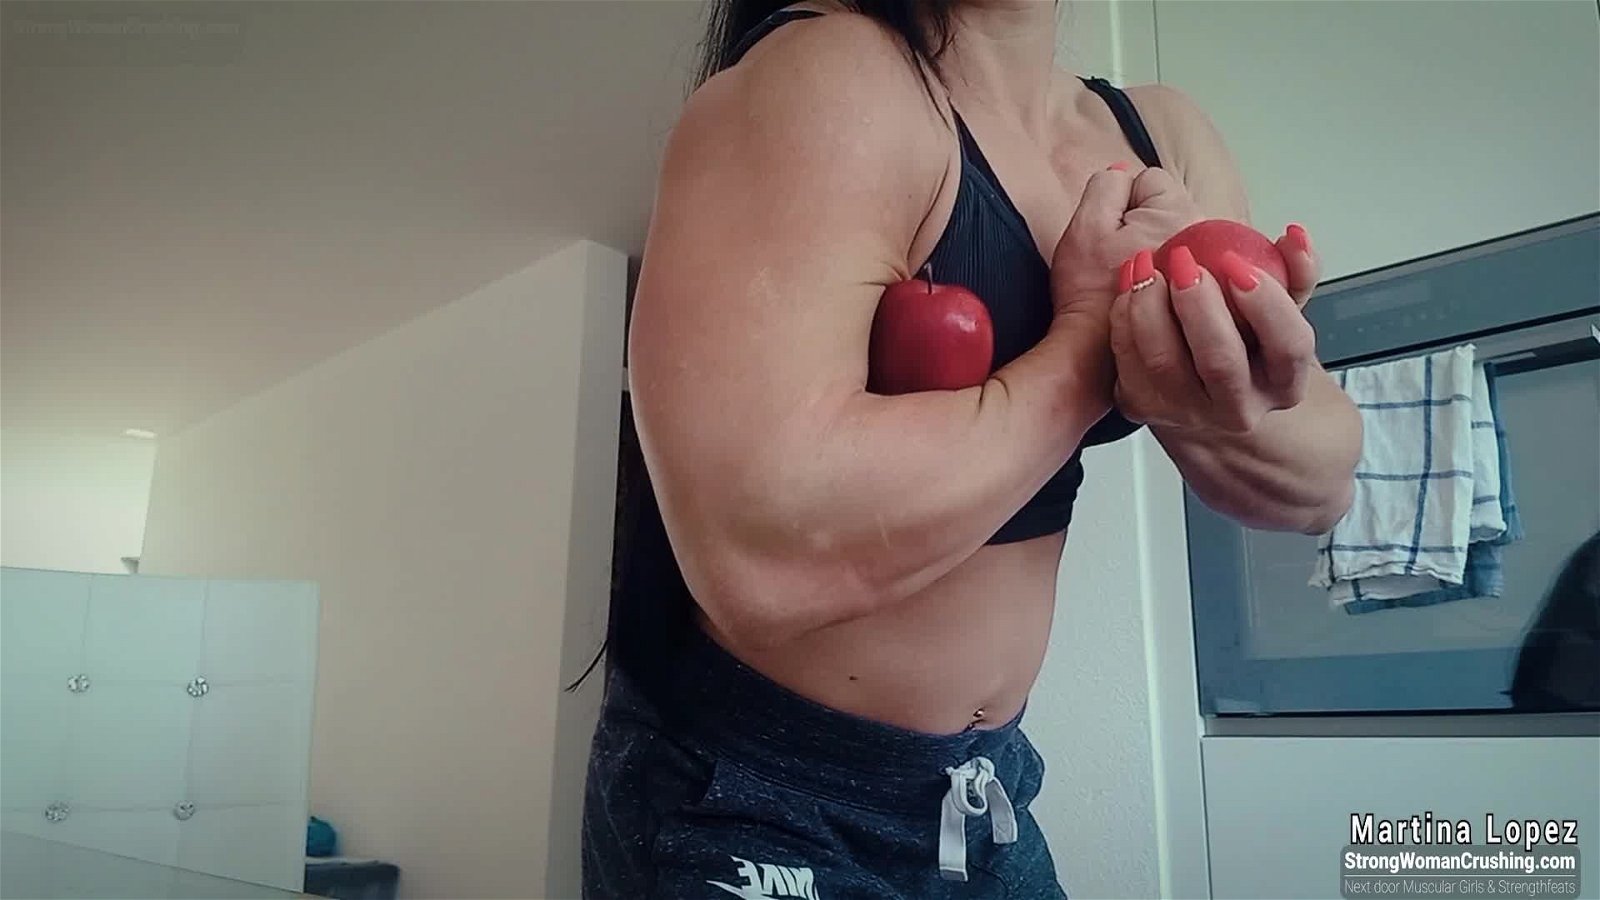 Photo by MusclegirlStrength with the username @MusclegirlStrength, who is a brand user,  February 2, 2024 at 3:58 PM and the text says 'Unleashing Her Apple Juice Power: Watch Martina Lopez's Insane Muscle Feats!
Full Video: https://bit.ly/3yffXJT

Experience the awe-inspiring power and sensuality of Martina Lopez and other muscular female bodybuilders as they flex, bend metal, lift..'